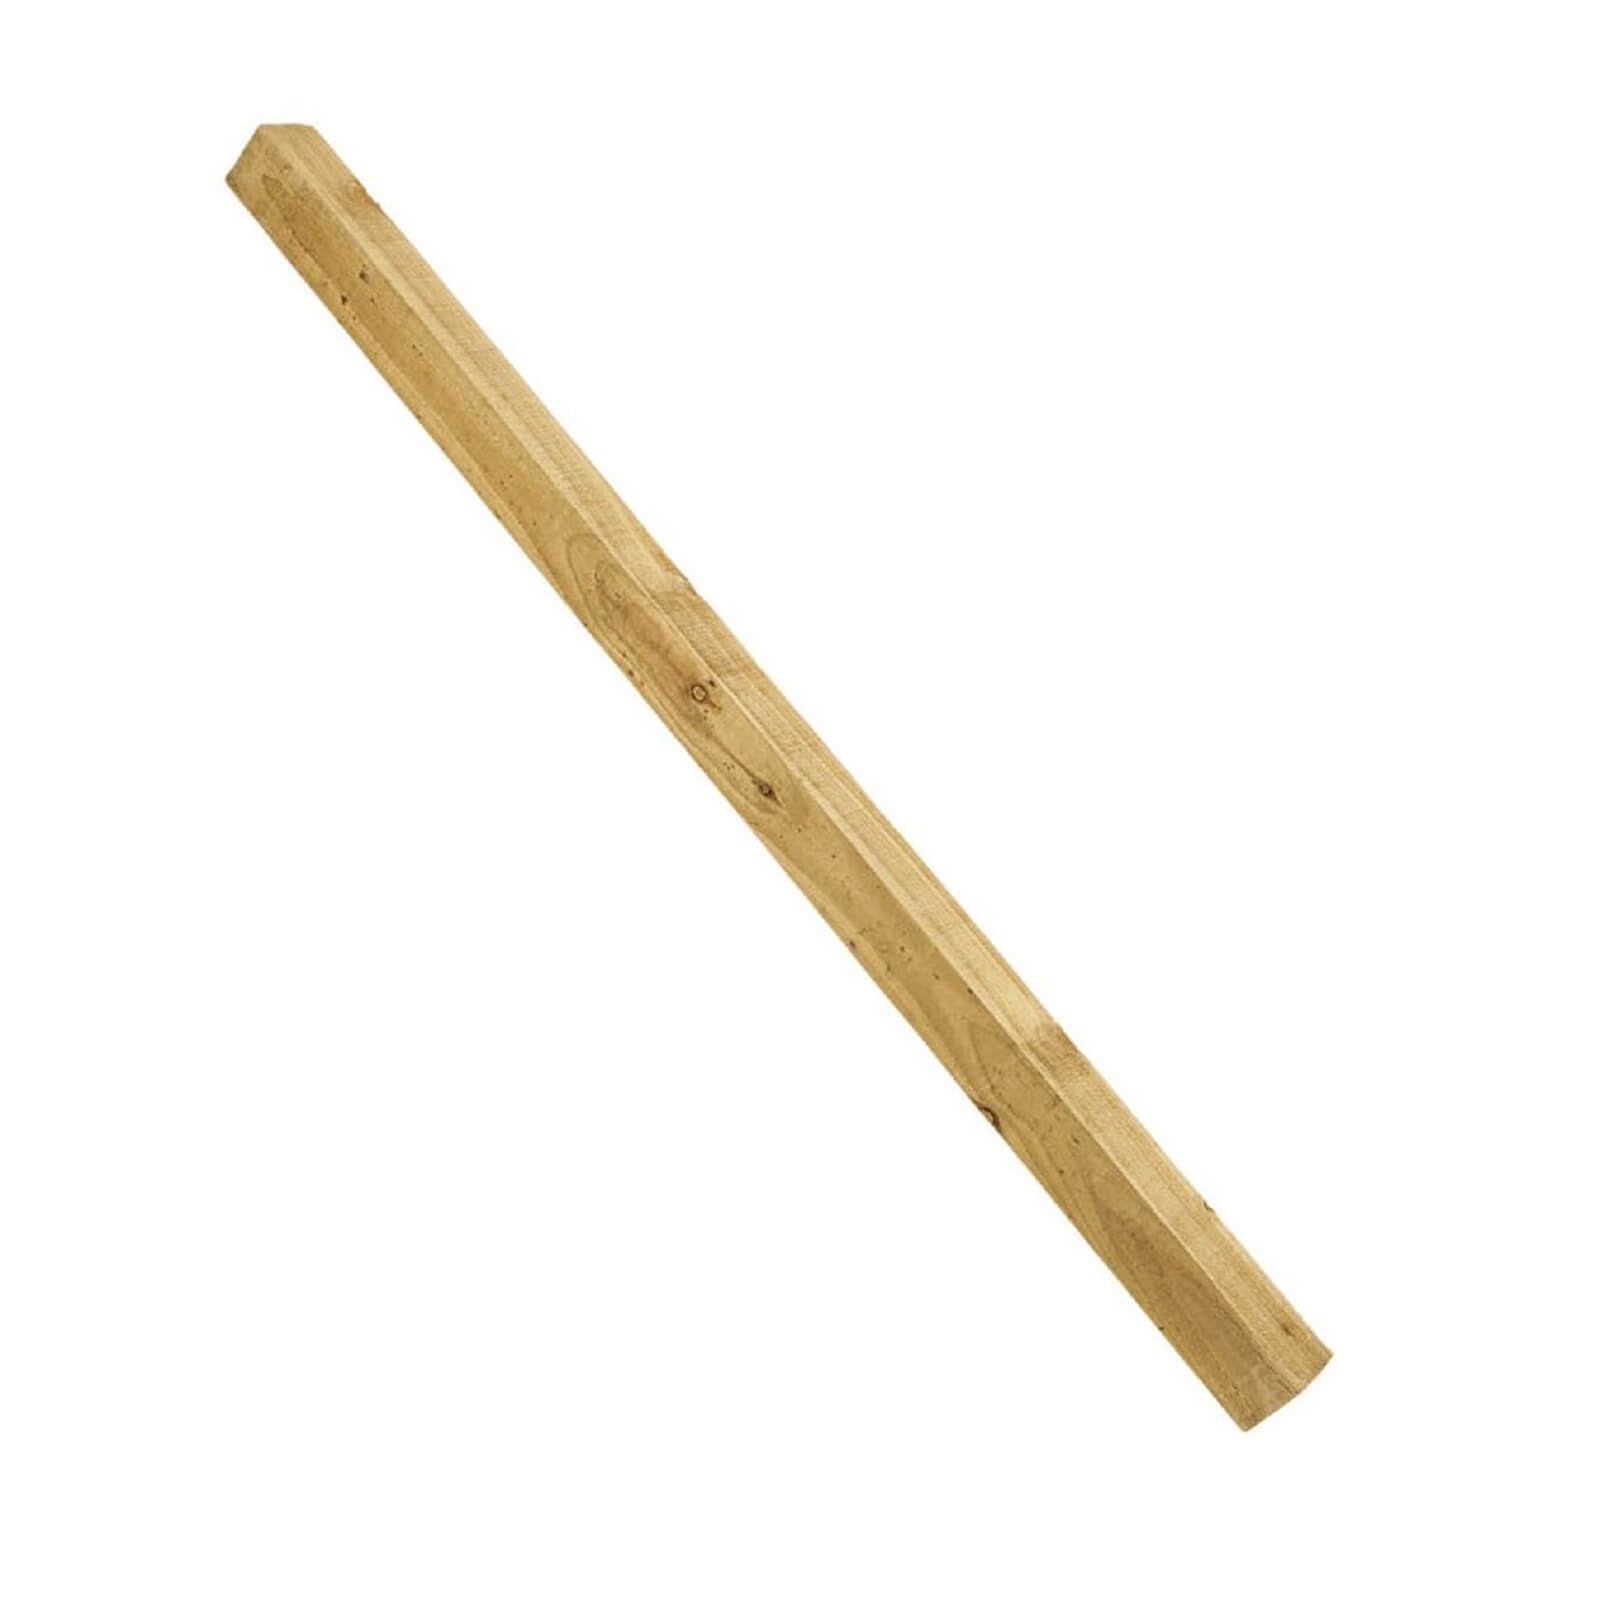 Photo of Larchlap Sawn Post - 8ft X 3in X 3in - 6 Pack